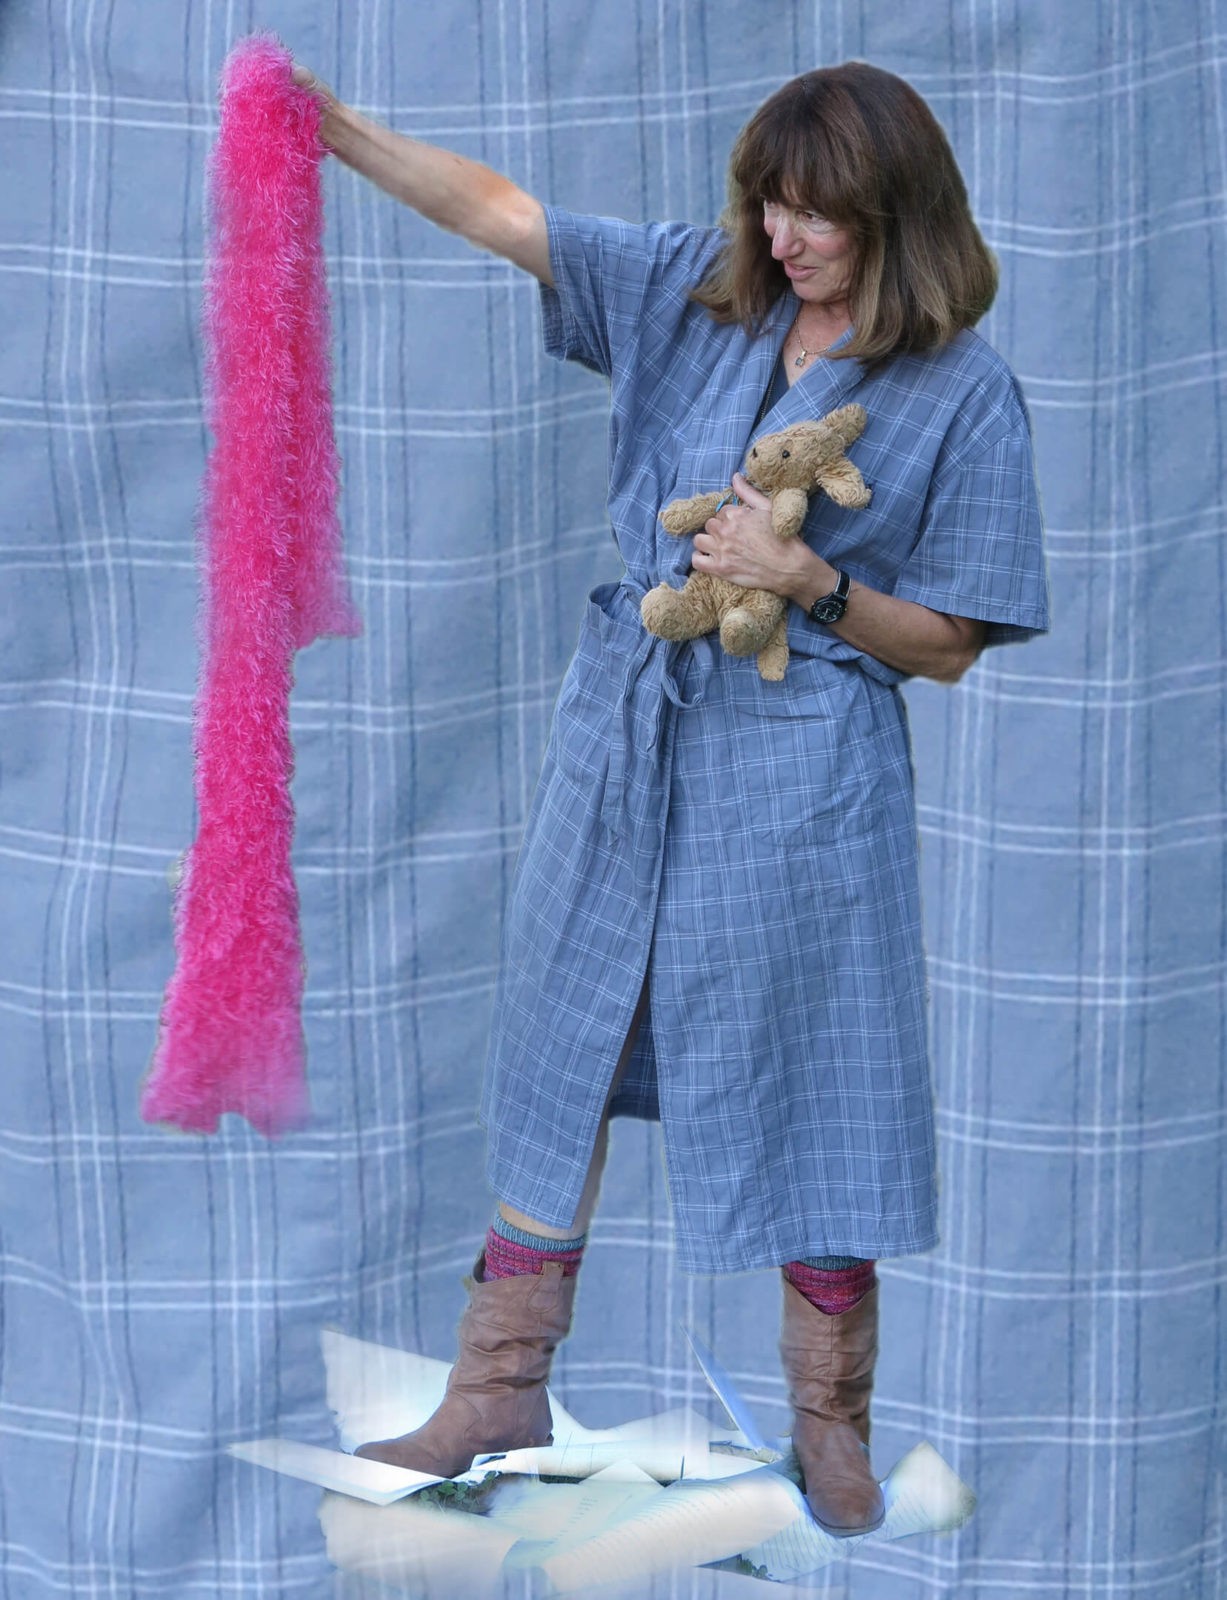 In Ithaca, New York, Robin Botie holds onto her daughter's stuffed puppy and old cowboy boots but she lets go of the pink boa and her manuscript.